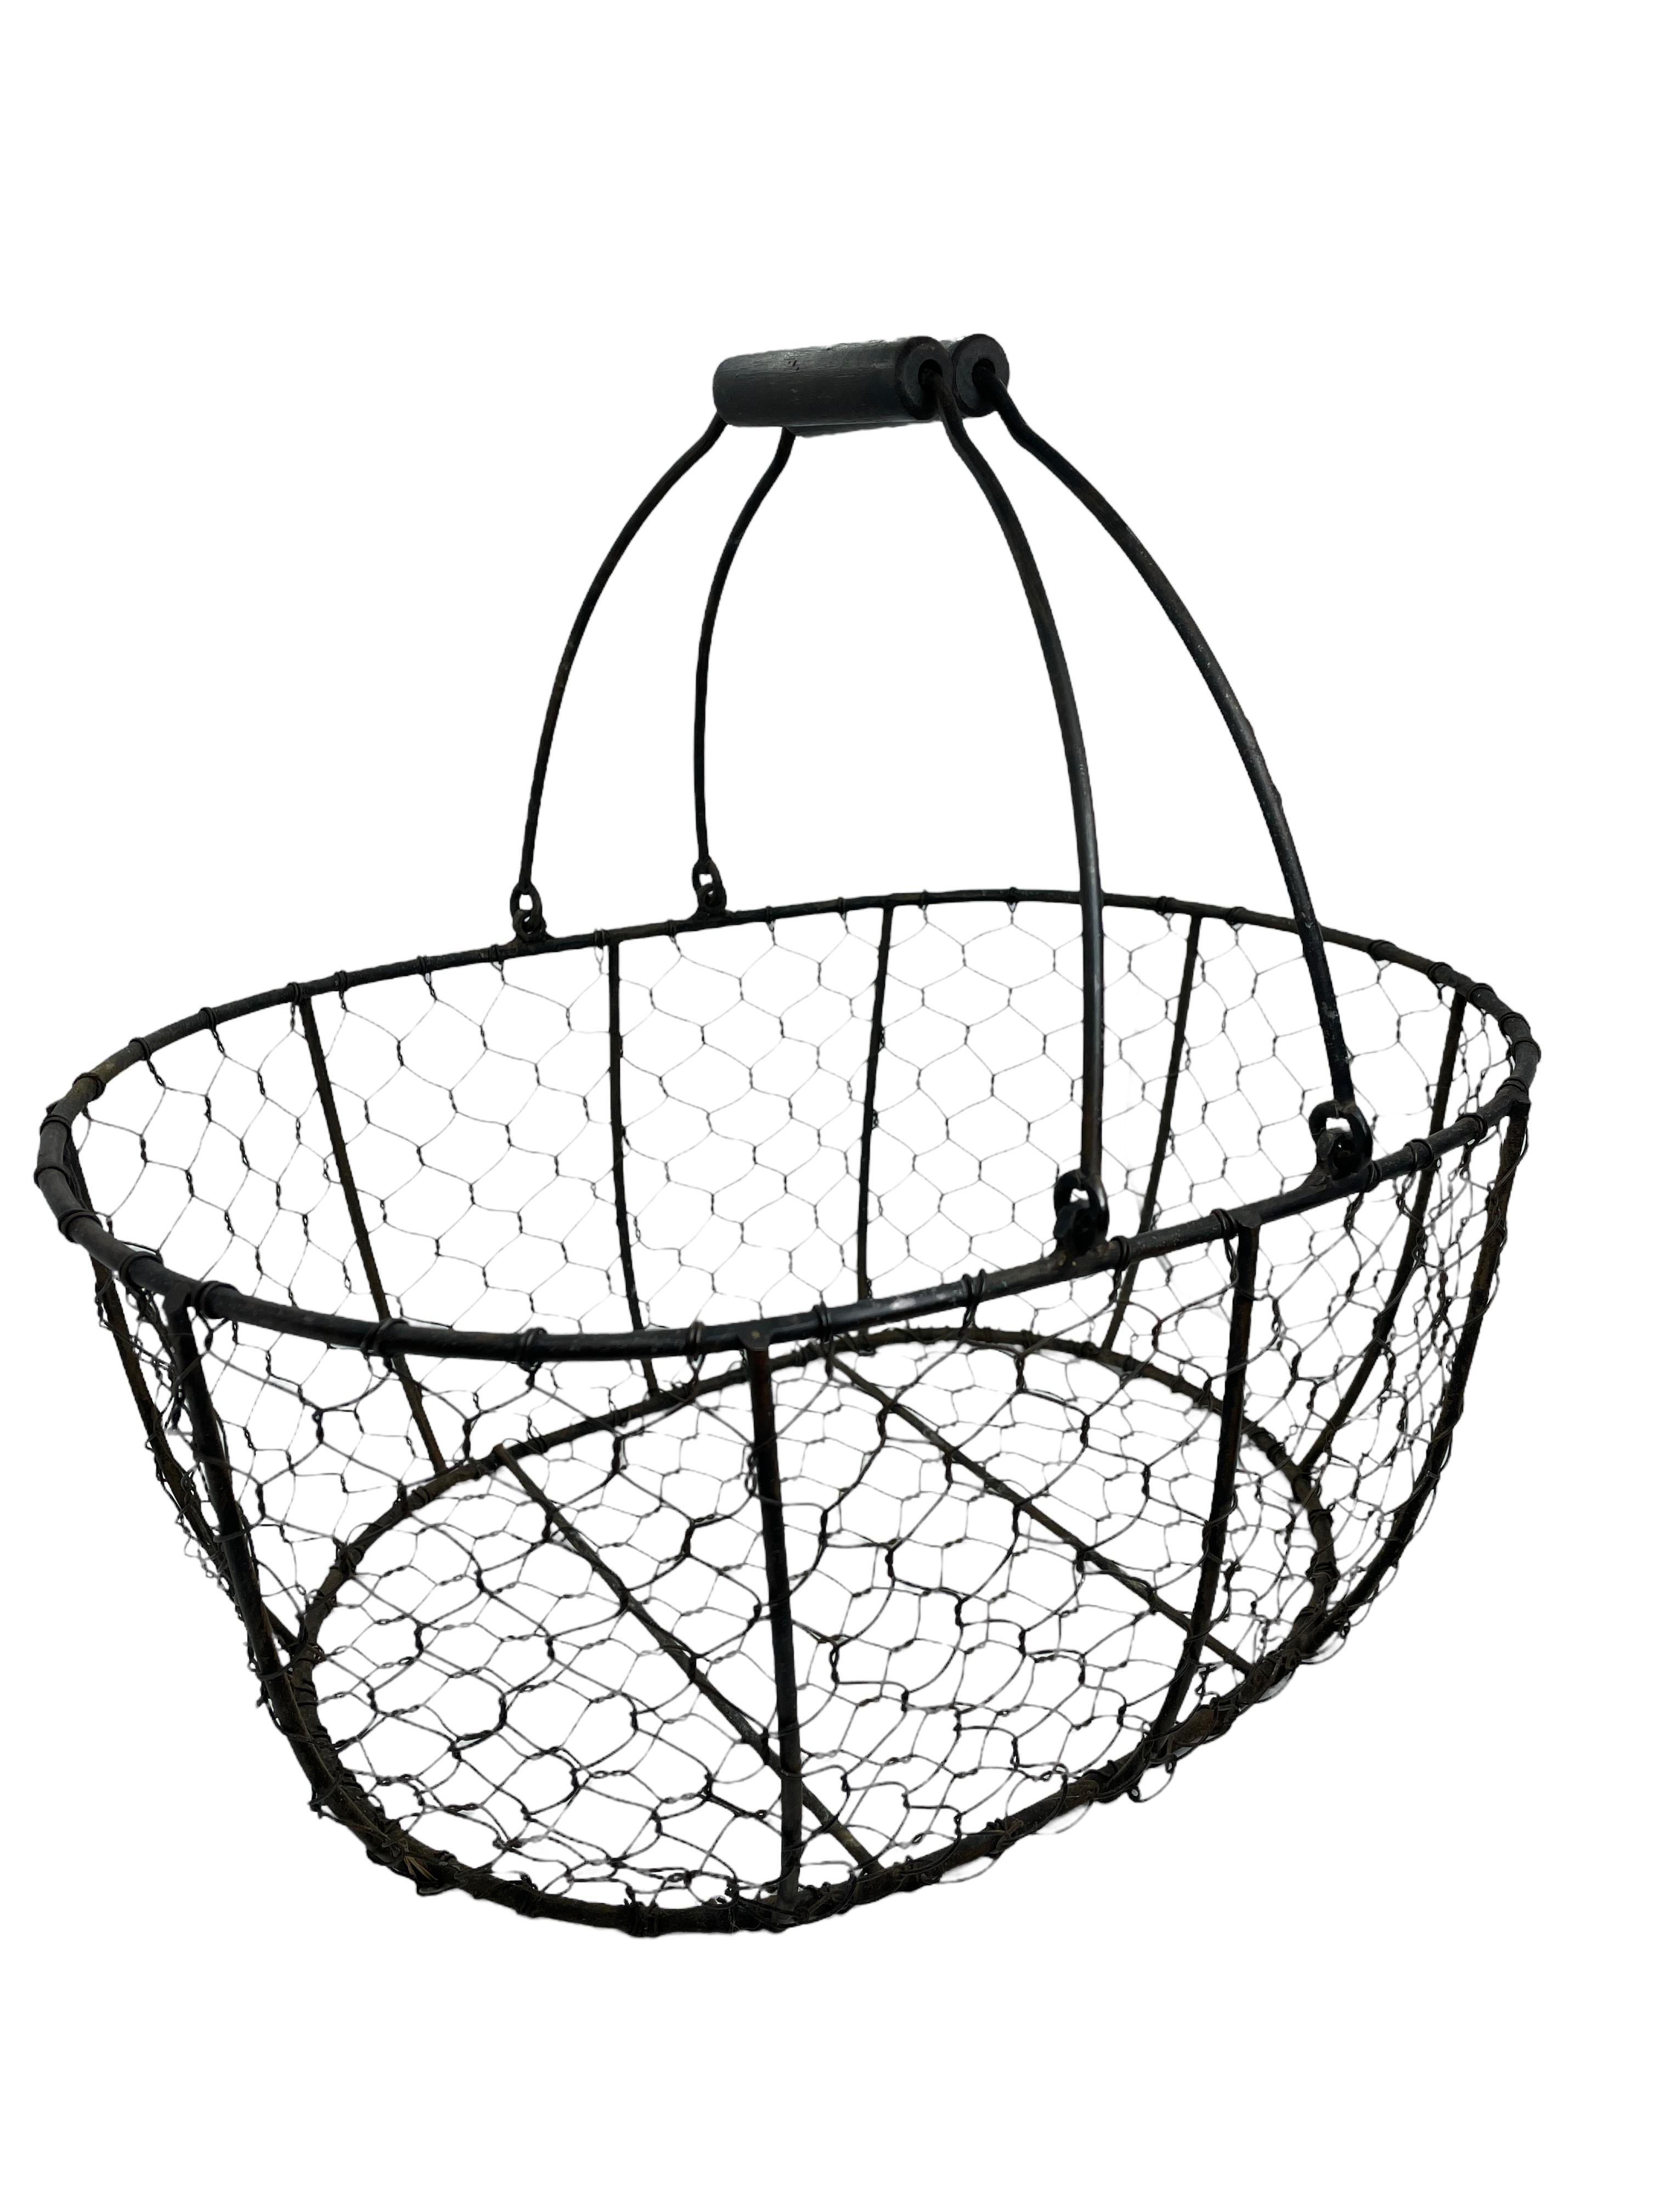 Beautiful chicken wire made Basket, circa 1930s. Made of wire and wooden handles. Found at an estate sale in Vienna, Austria. Nice addition to any Country Kitchen. Size given in measurements section is from the ground to the end of the handles.